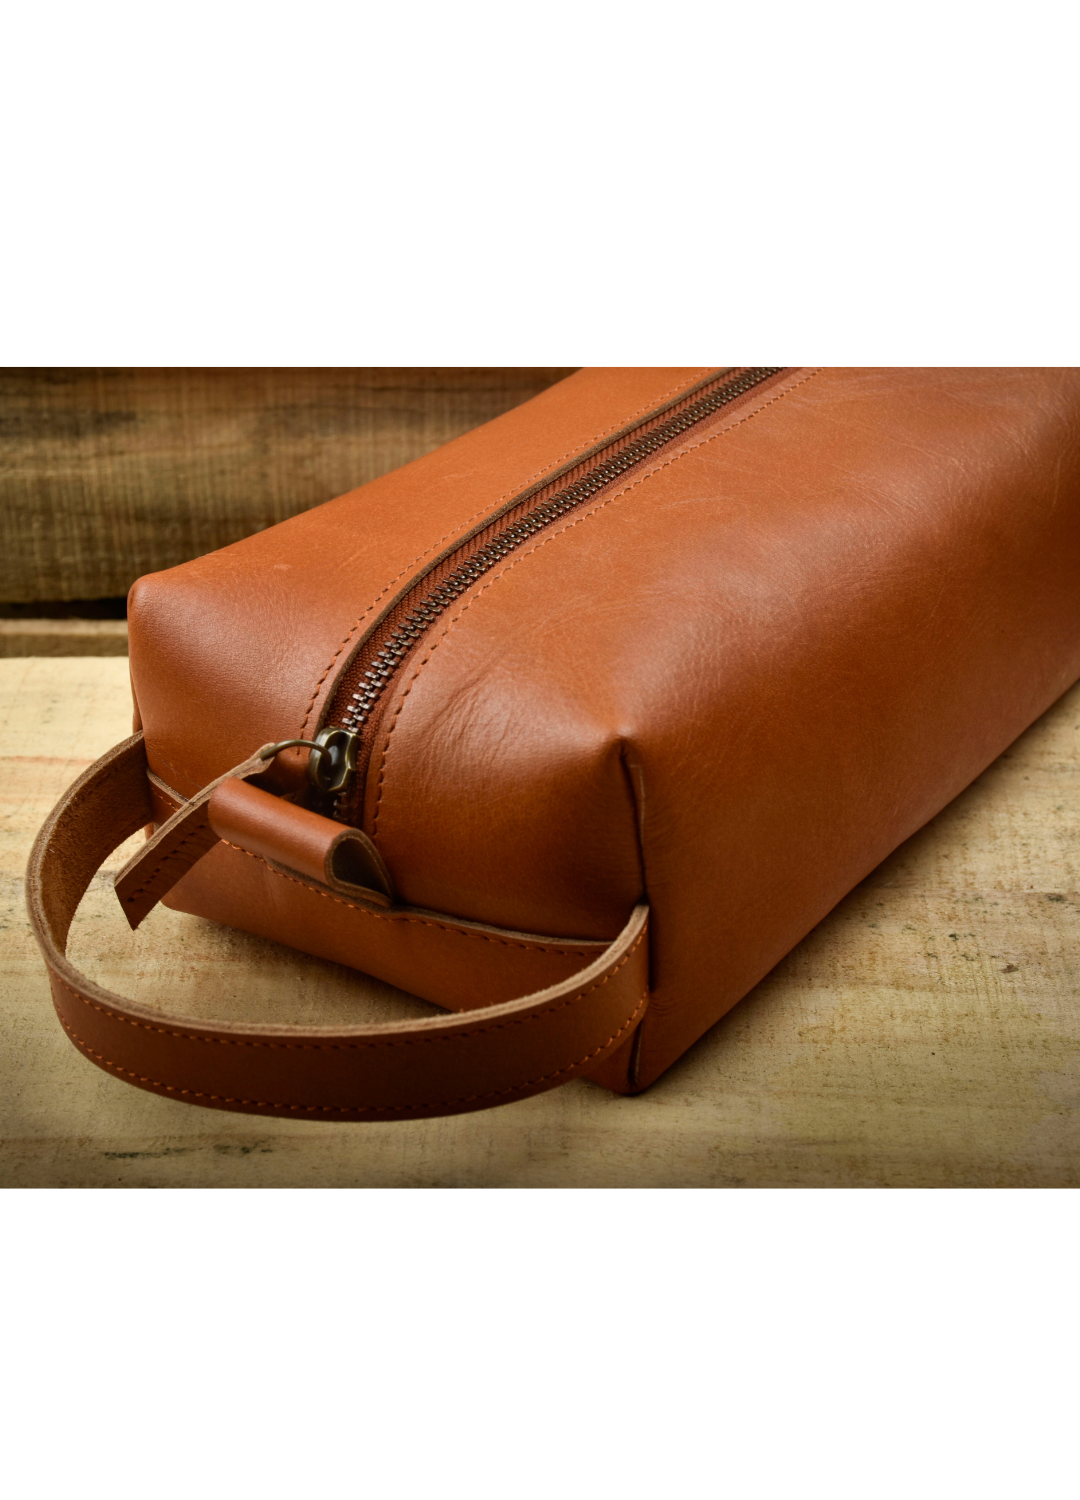 Nappa leather toiletry bag with zip · Black, Brown · Accessories